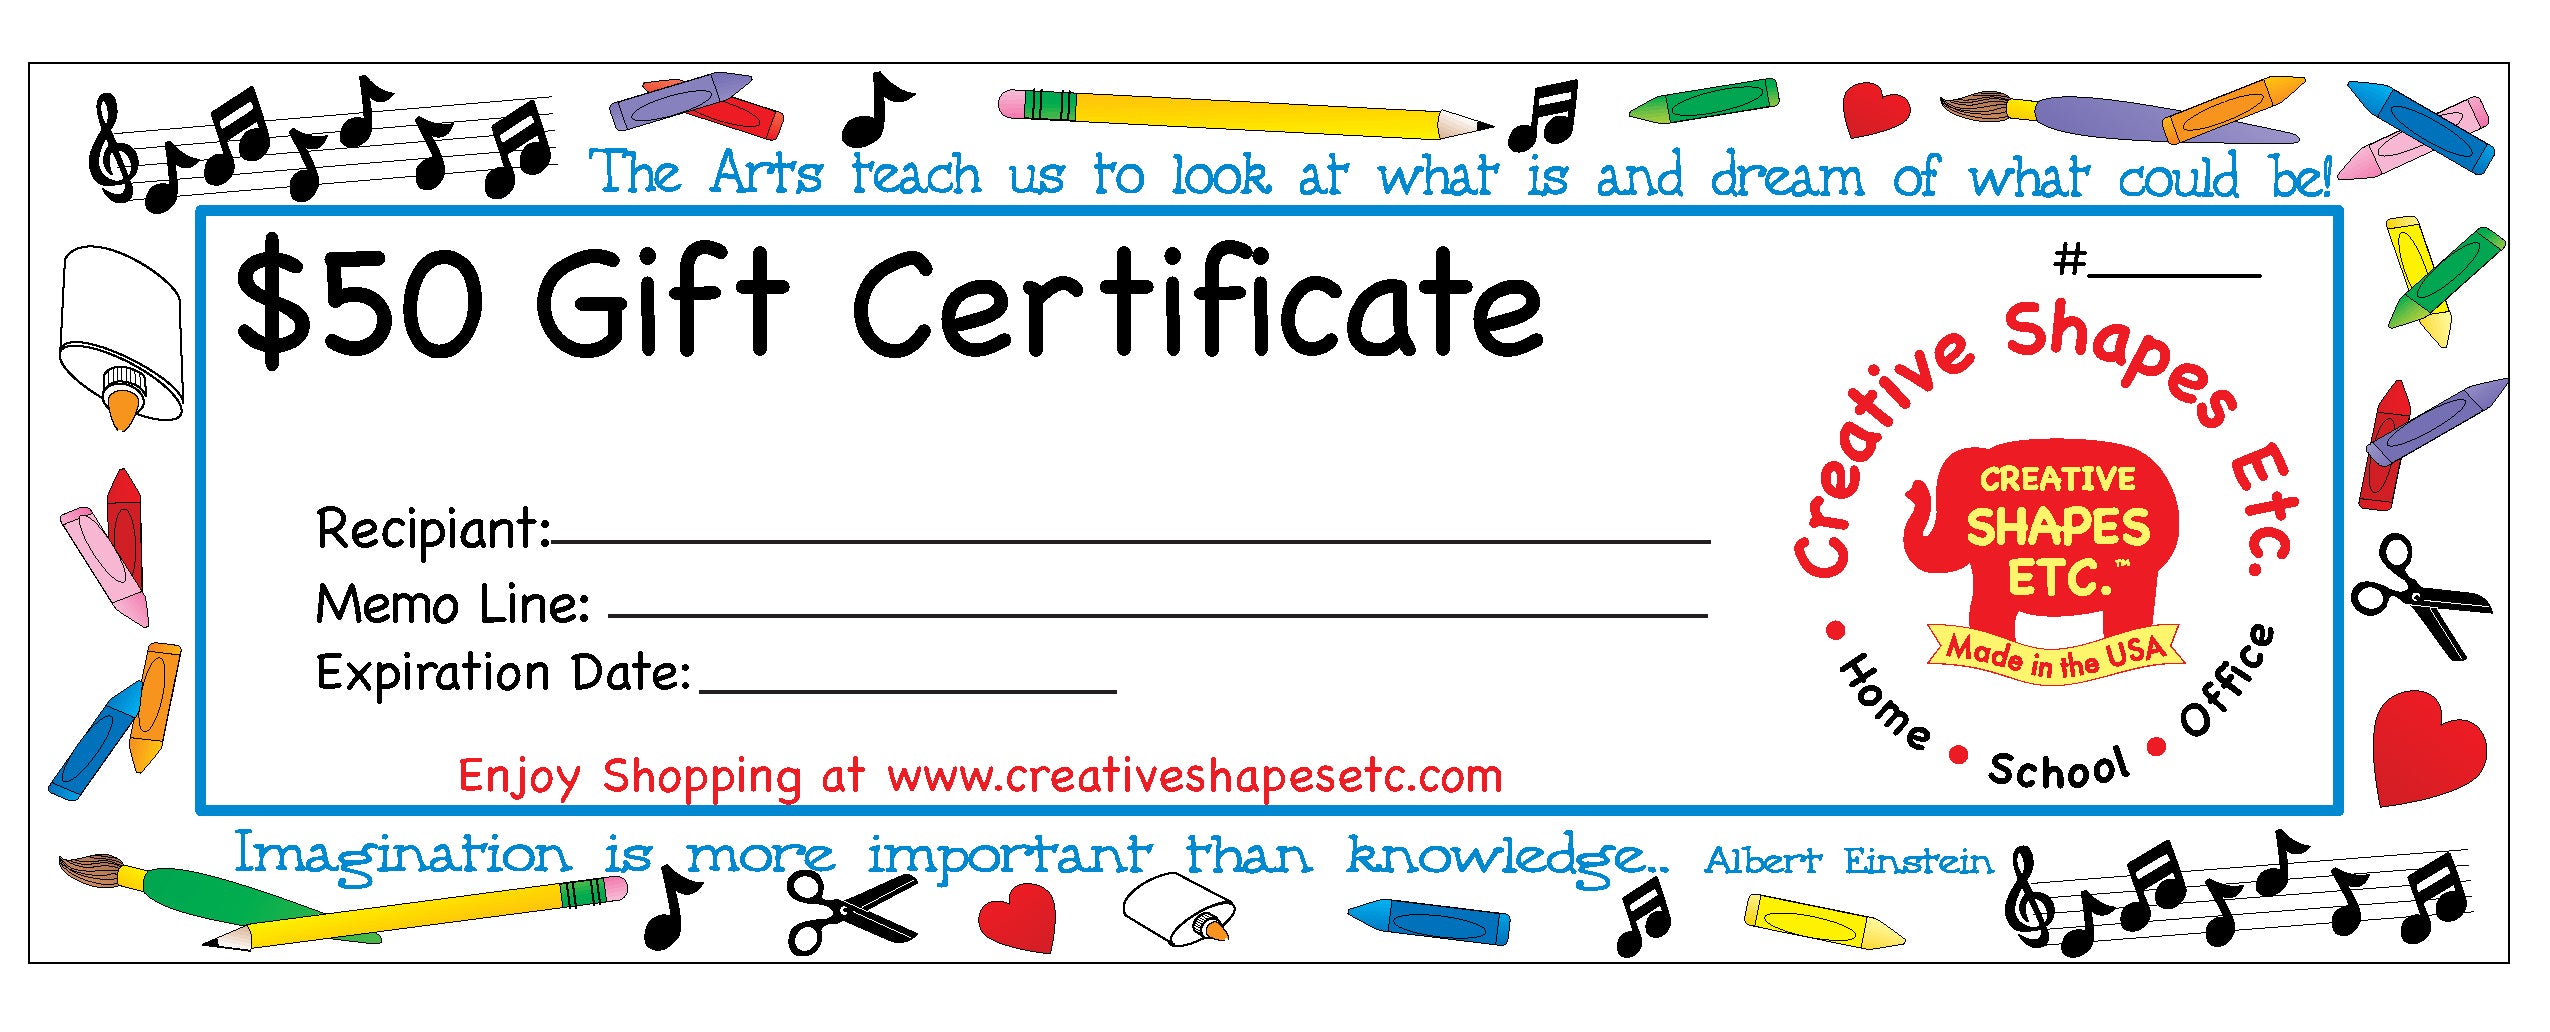 printable gift certificates templates